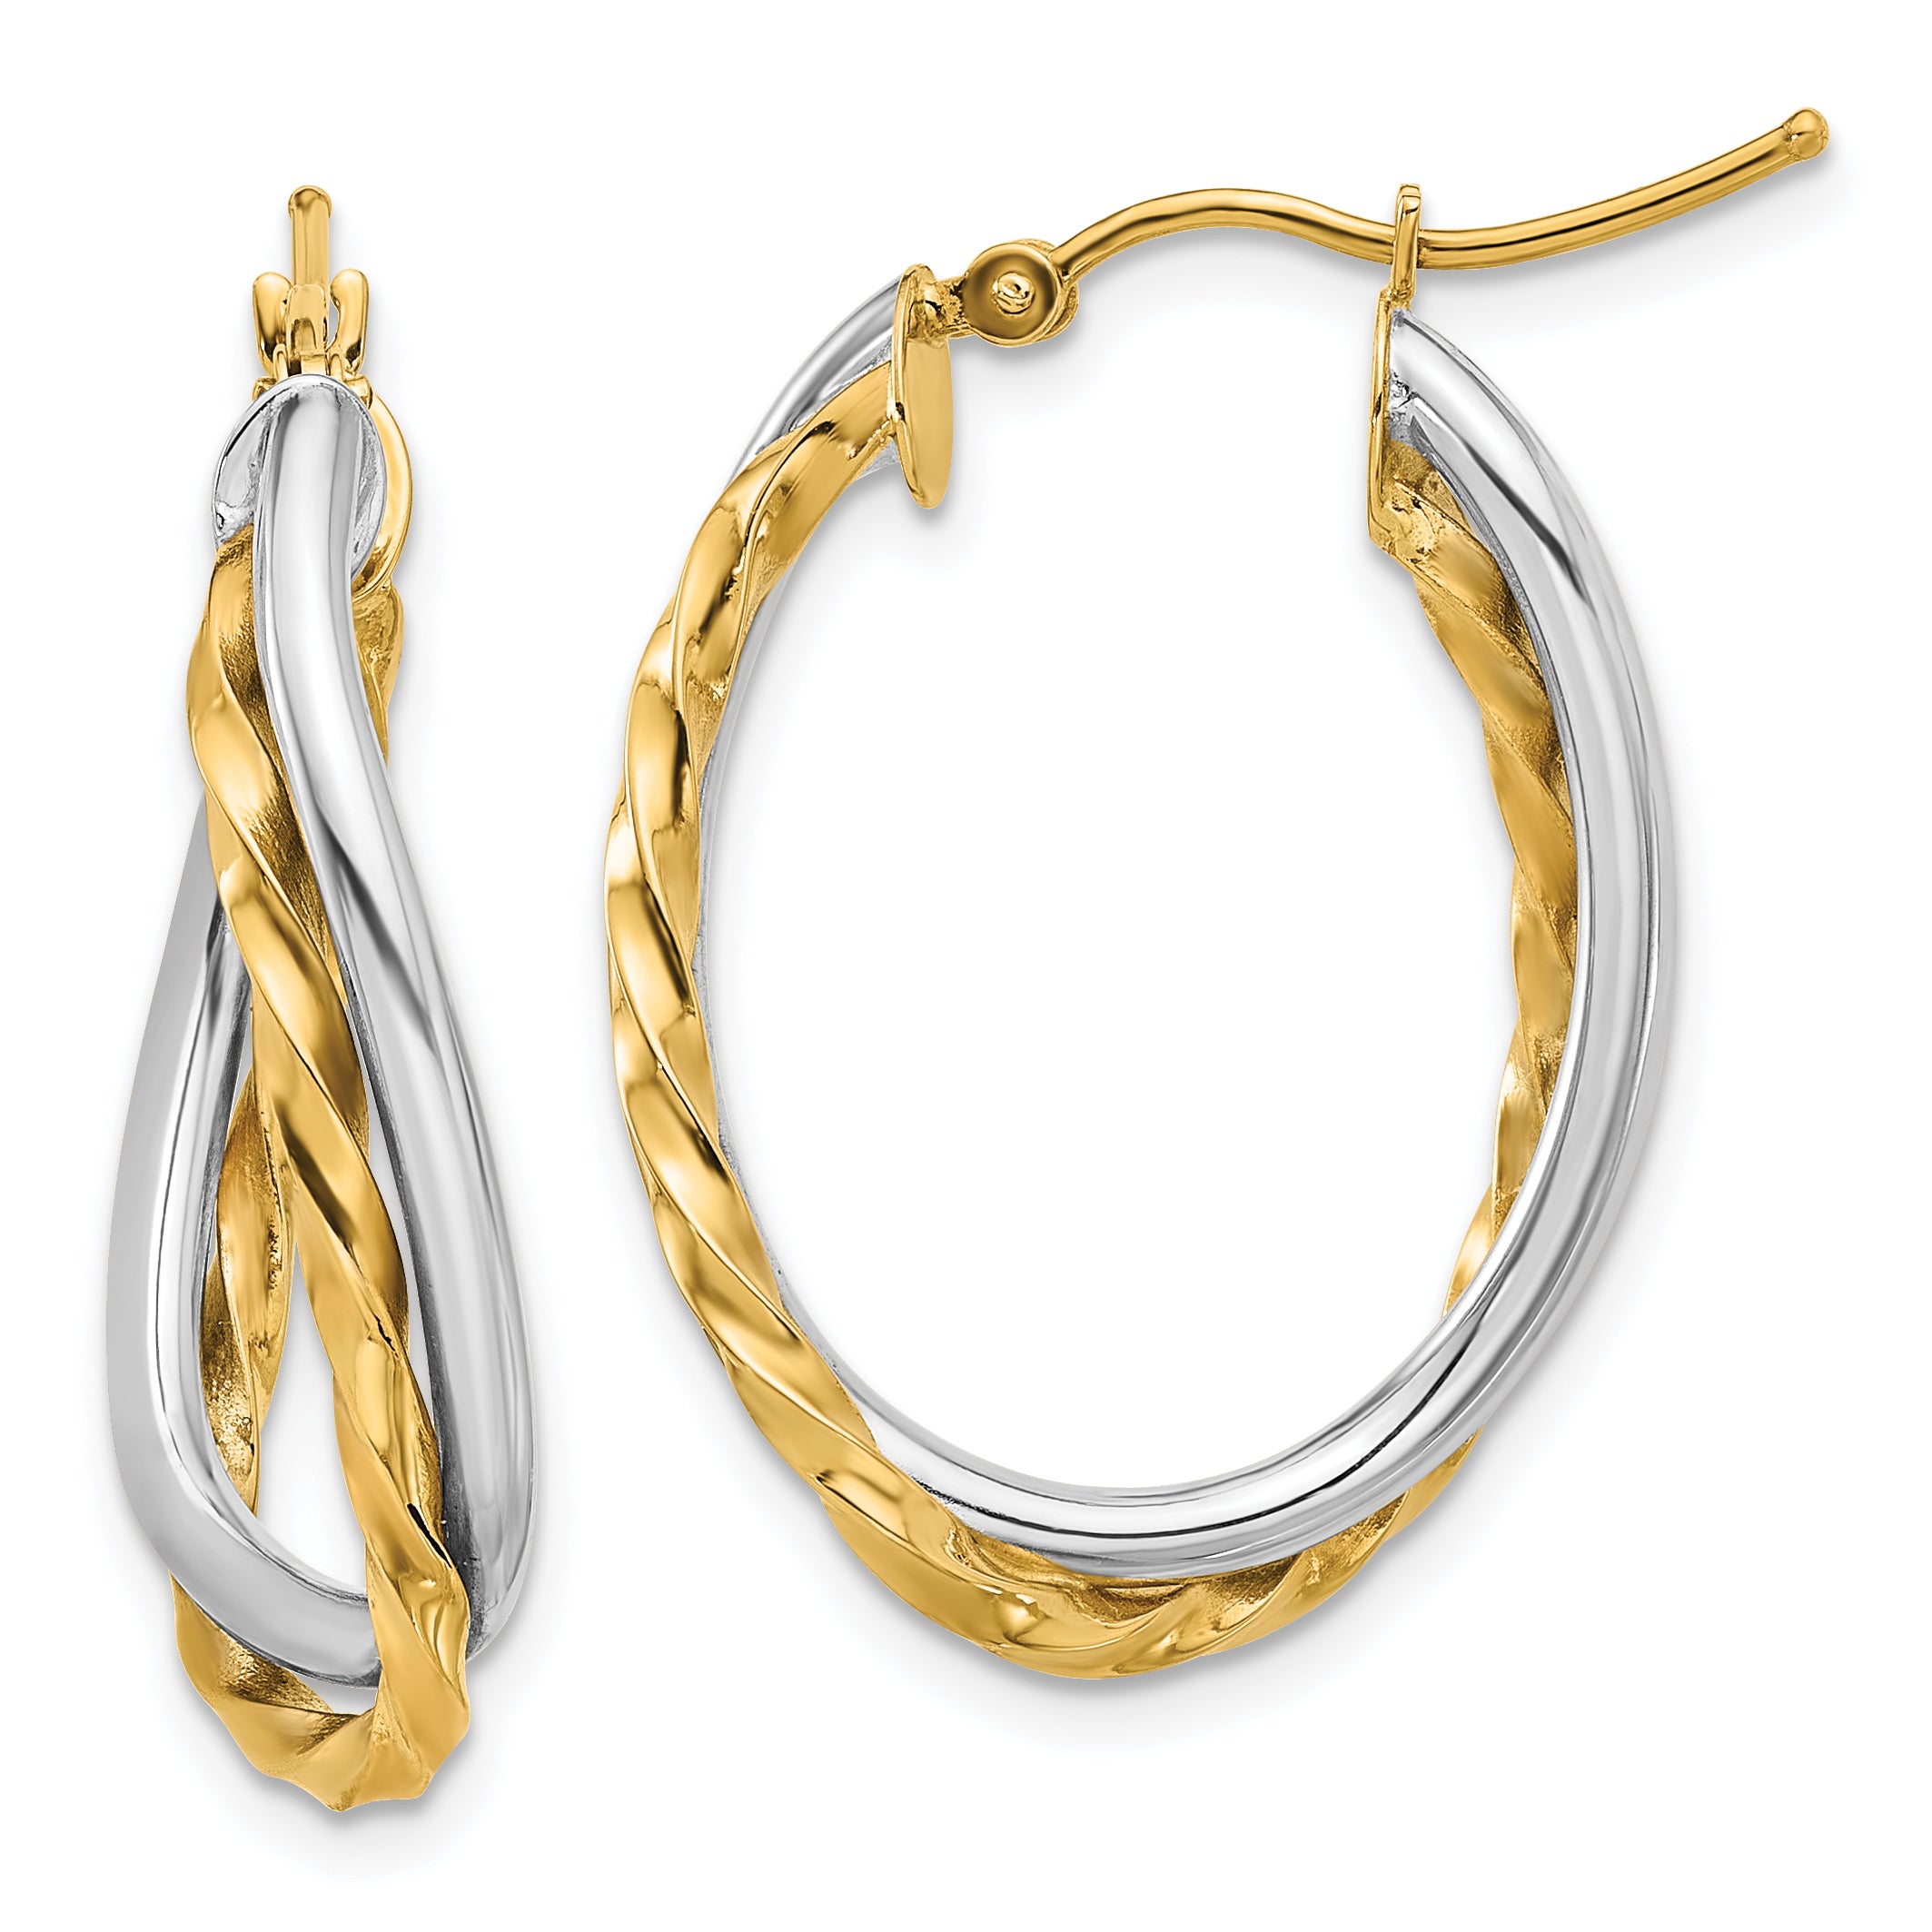 14k Two-Tone Textured and Polished Twist Oval Hoop Earrings